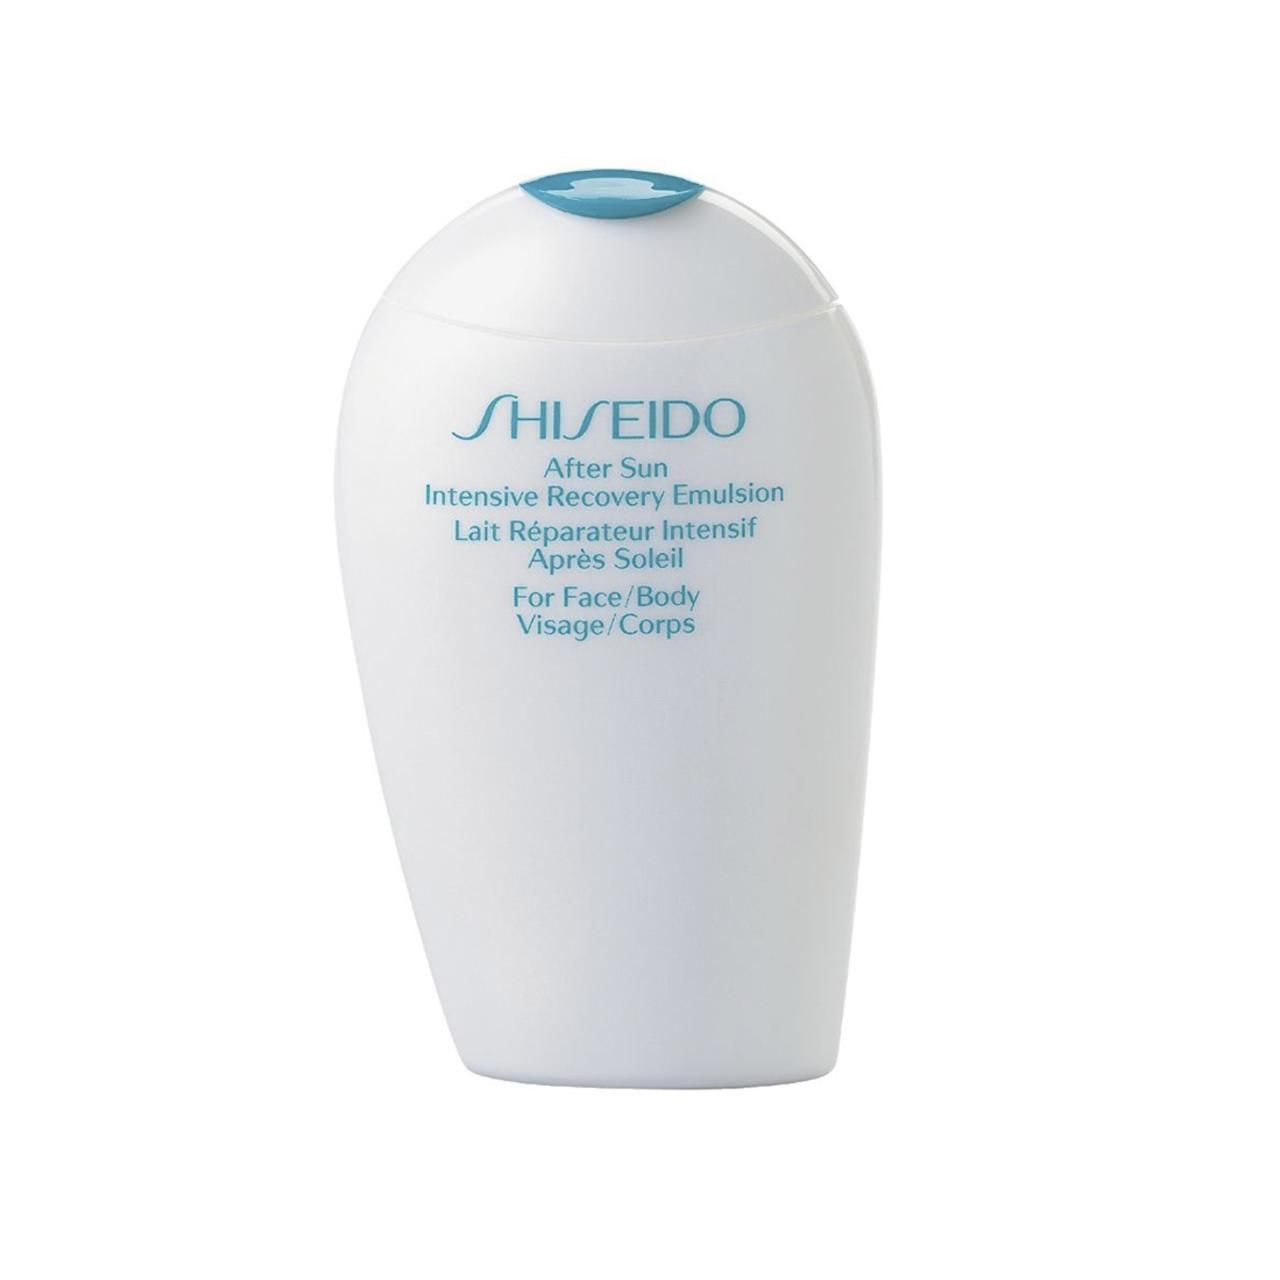 Shiseido, After Sun Intensive Recovery Emulsion